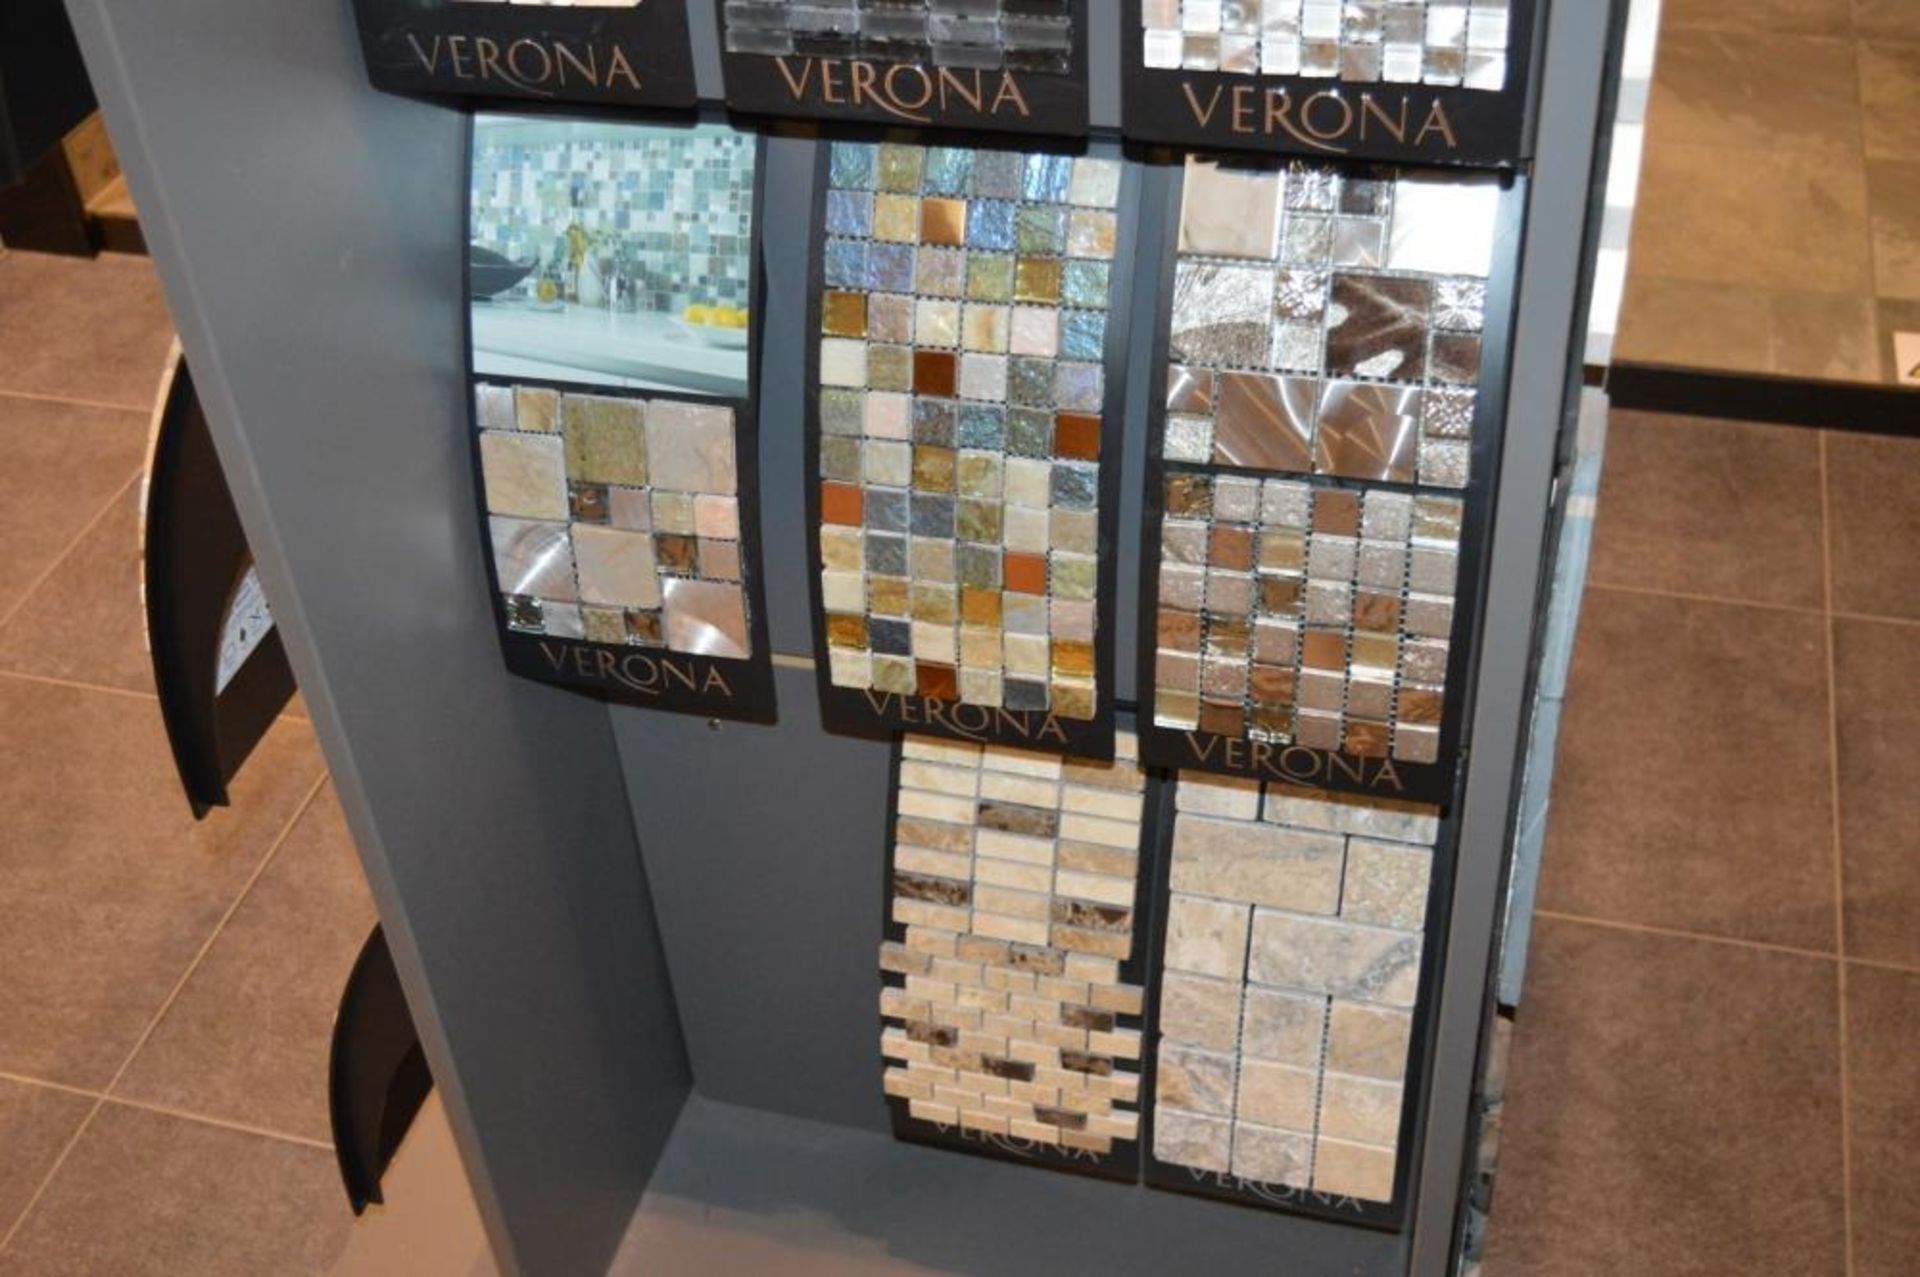 1 x Verona Tile Display Unit With Sample Stock - H184 x W84 x D65 cms - CL406 - Ref H226 - Ex - Image 7 of 11